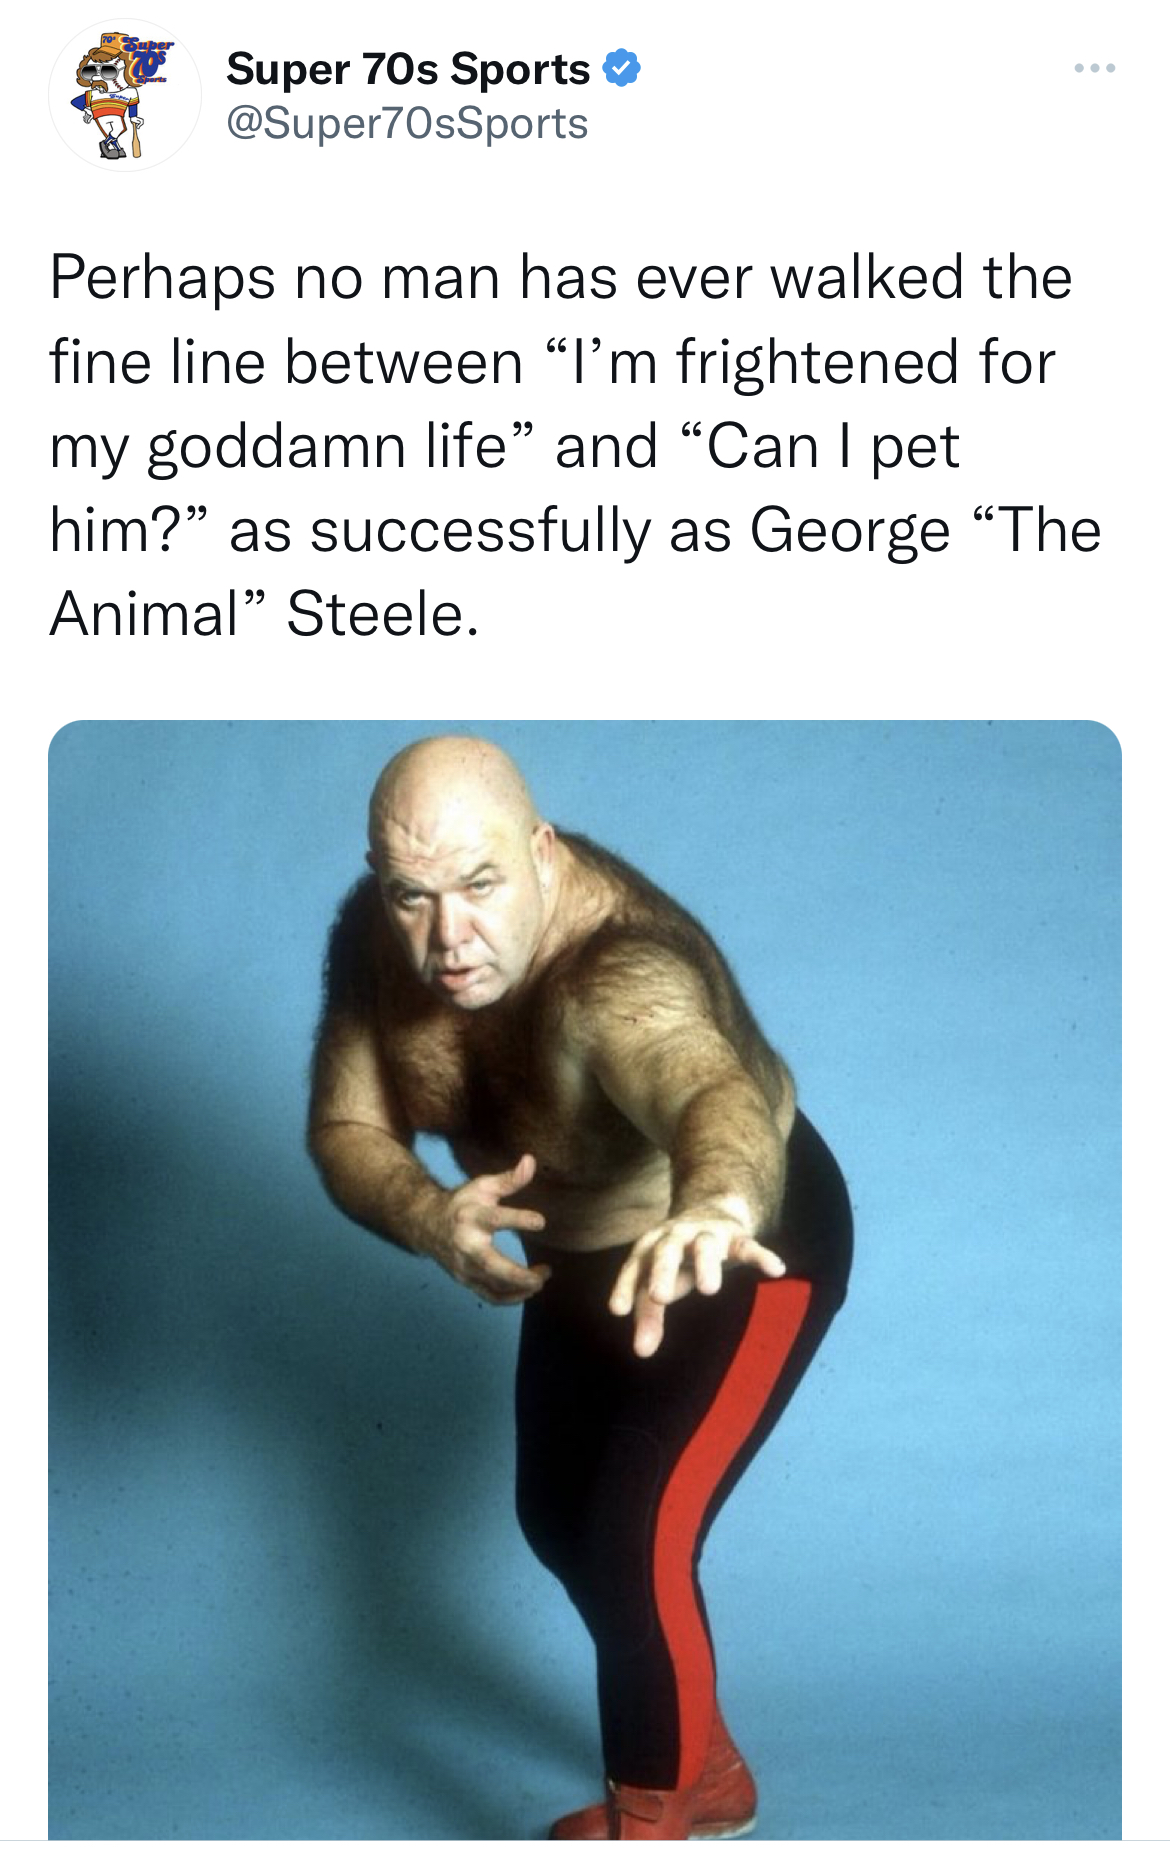 Tweets dunking on celebs - shoulder - Super 70s Sports Perhaps no man has ever walked the fine line between "I'm frightened for my goddamn life" and "Can I pet him?" as successfully as George "The Animal" Steele.